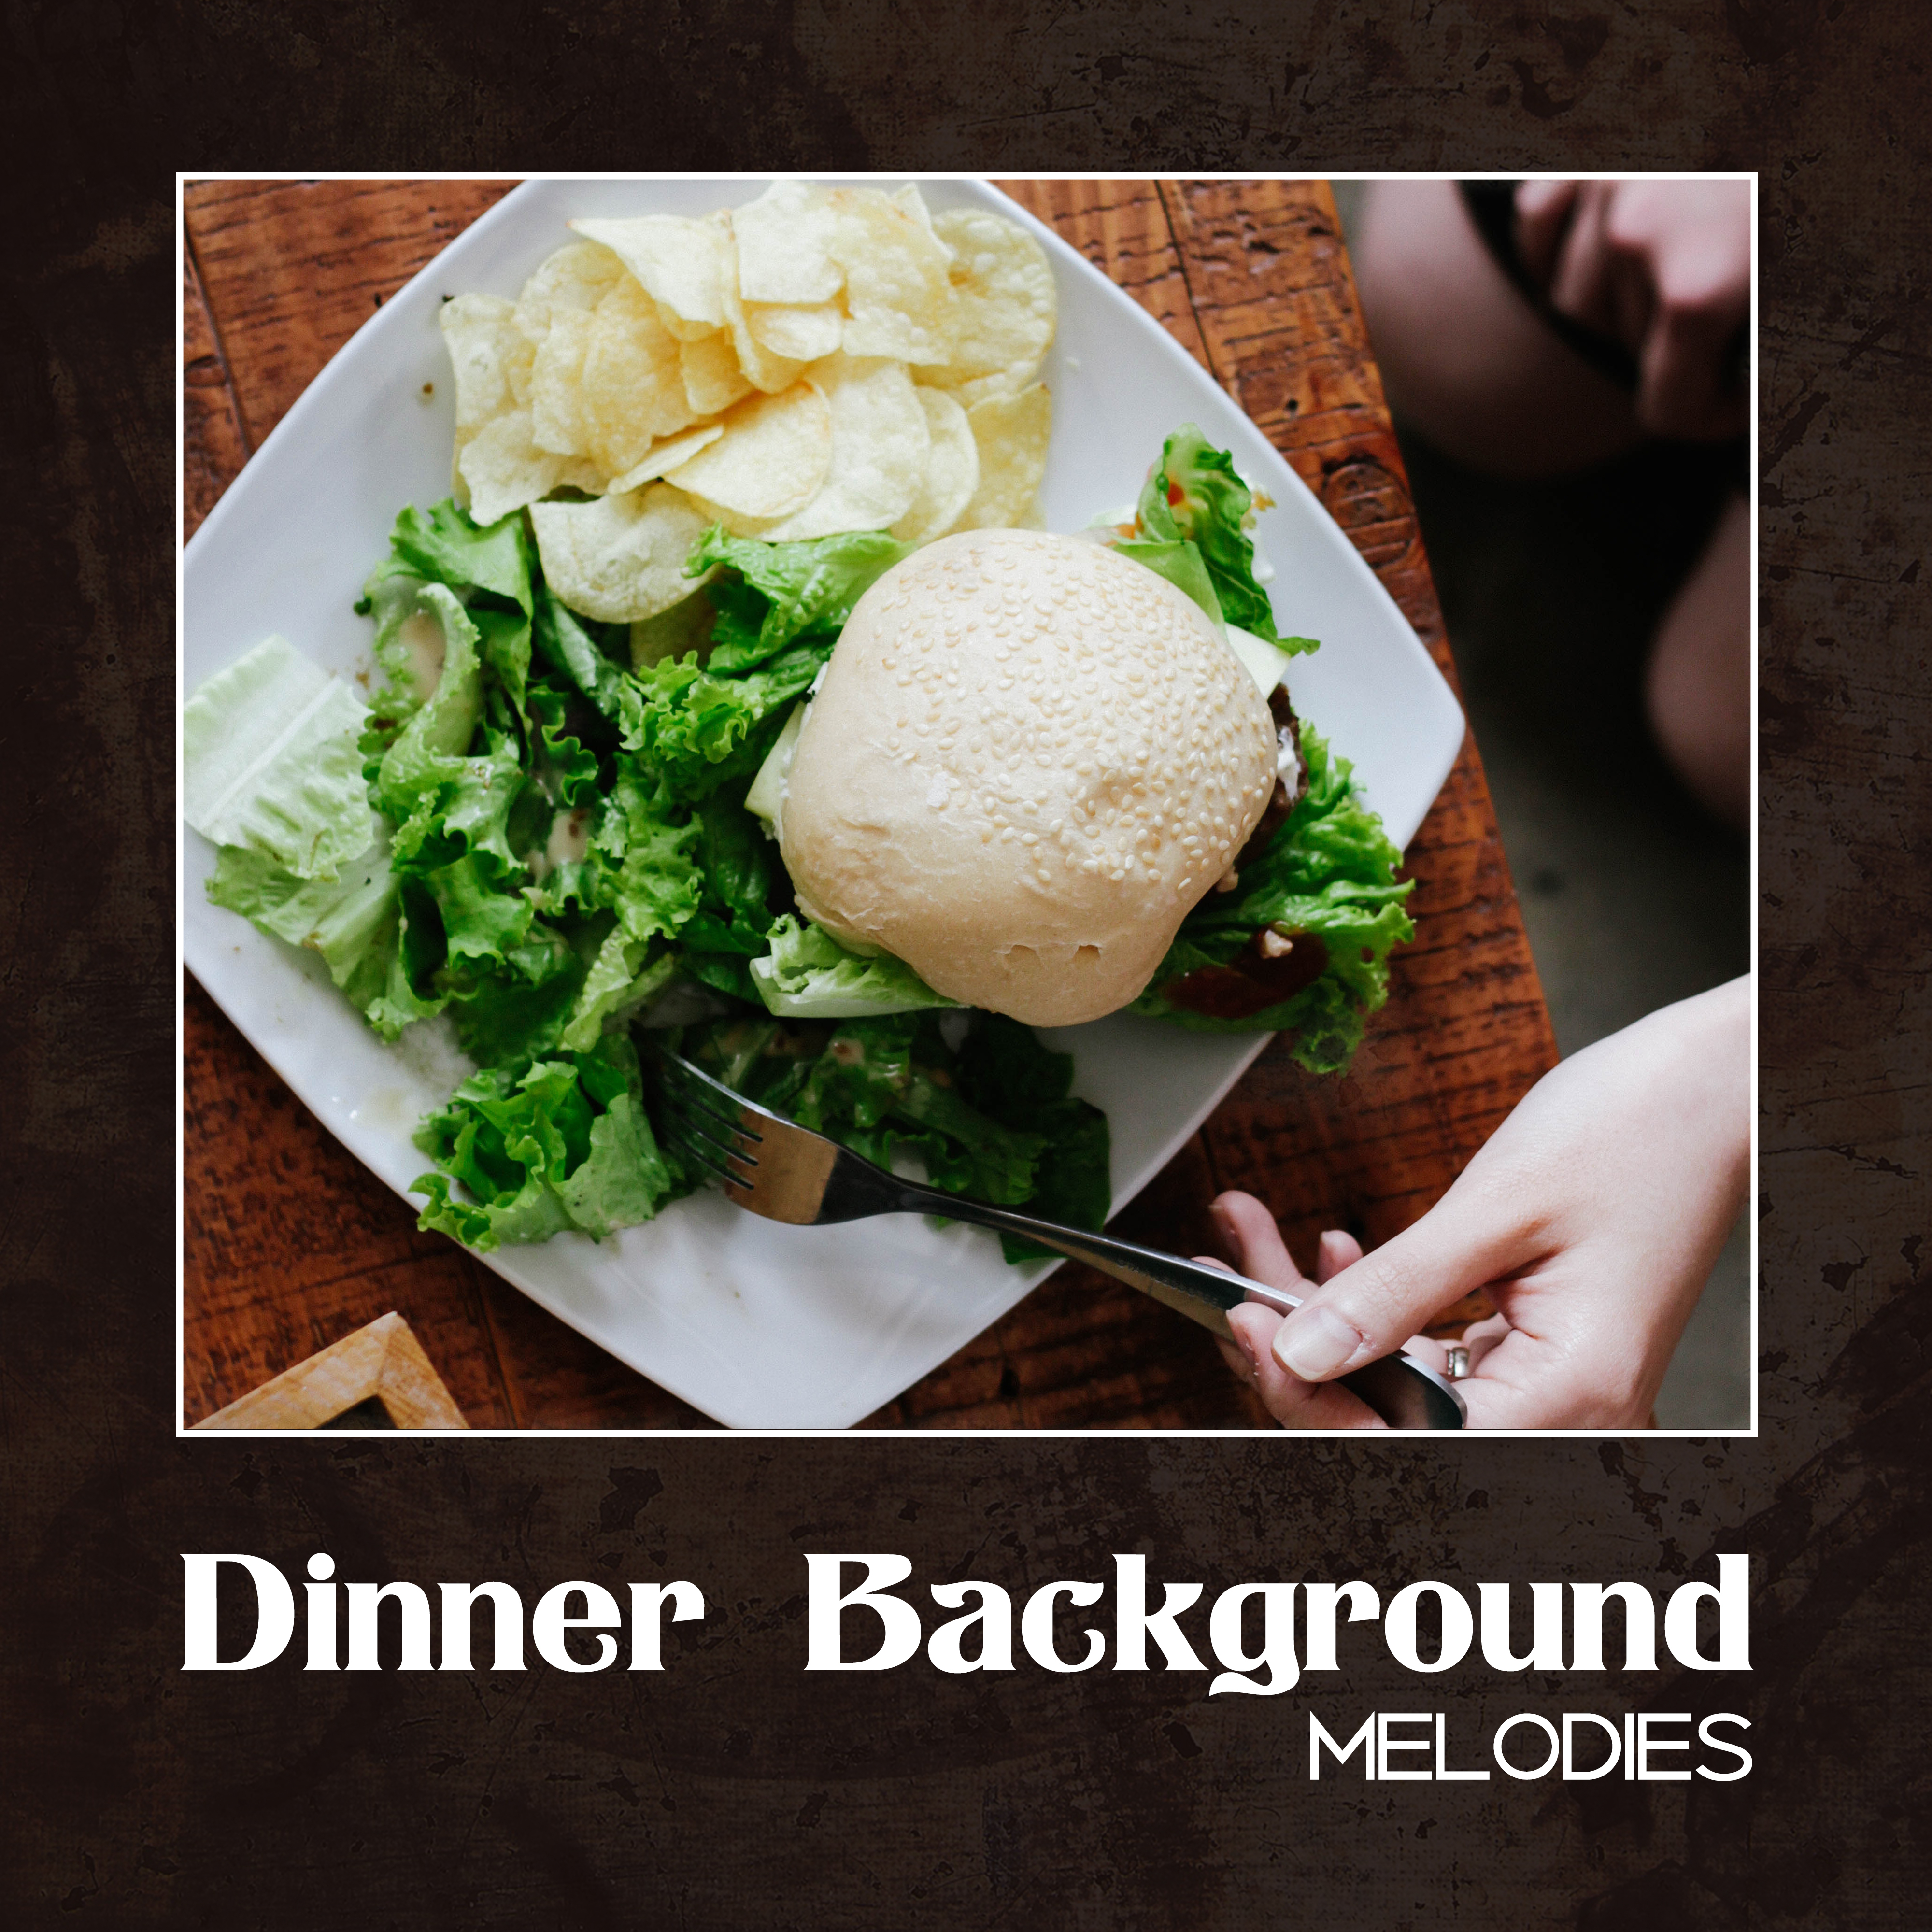 Dinner Background Melodies – Relaxing Jazz, Smooth Vibrations, Pure Instrumental Compilation